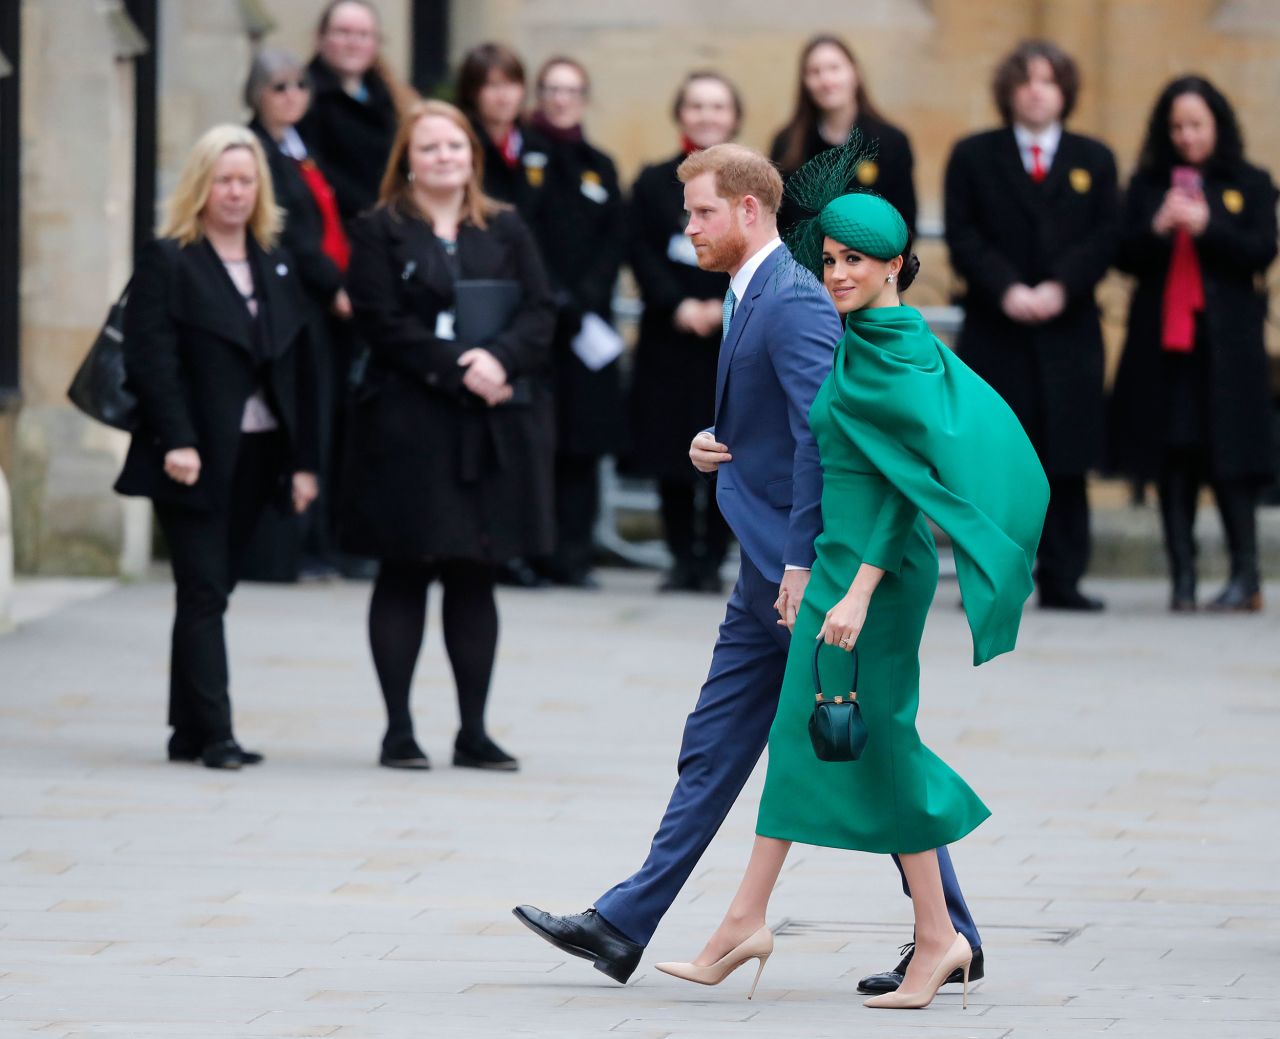 Harry and Meghan attend the annual Commonwealth Day service at London's Westminster Abbey in March 2020. This marked the couple's <a href="https://www.cnn.com/2020/03/09/uk/harry-and-meghan-final-engagement-intl-scli-gbr/index.html" target="_blank">final engagement as senior members of the royal family</a>.